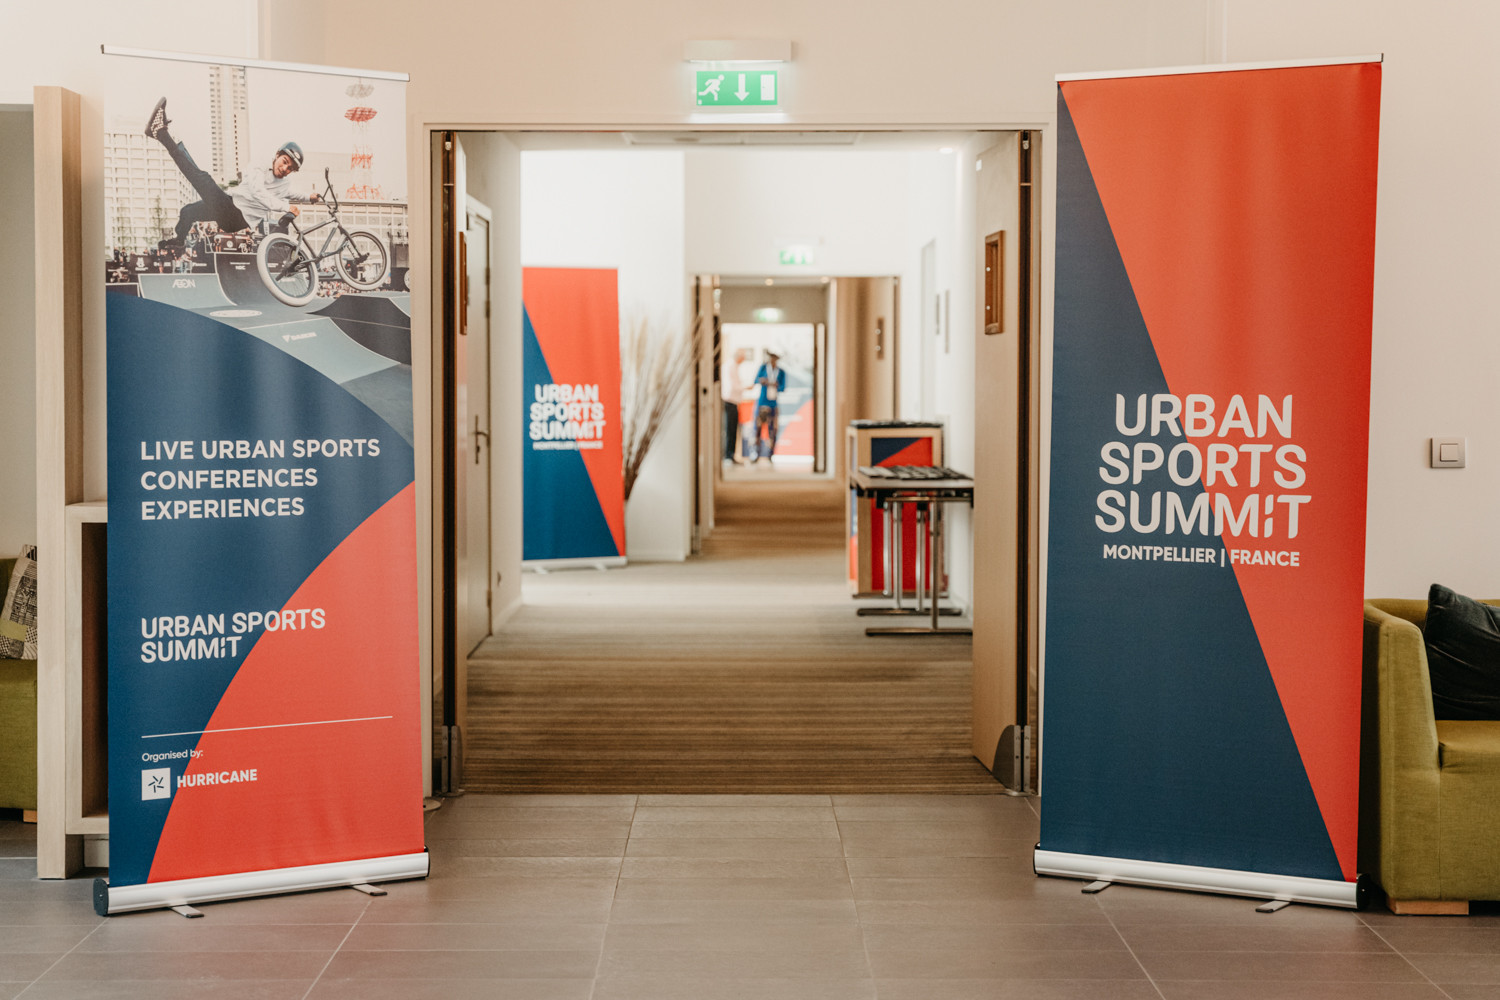 Key stakeholders met at the Urban Sports Summit in Montpellier to discuss the 